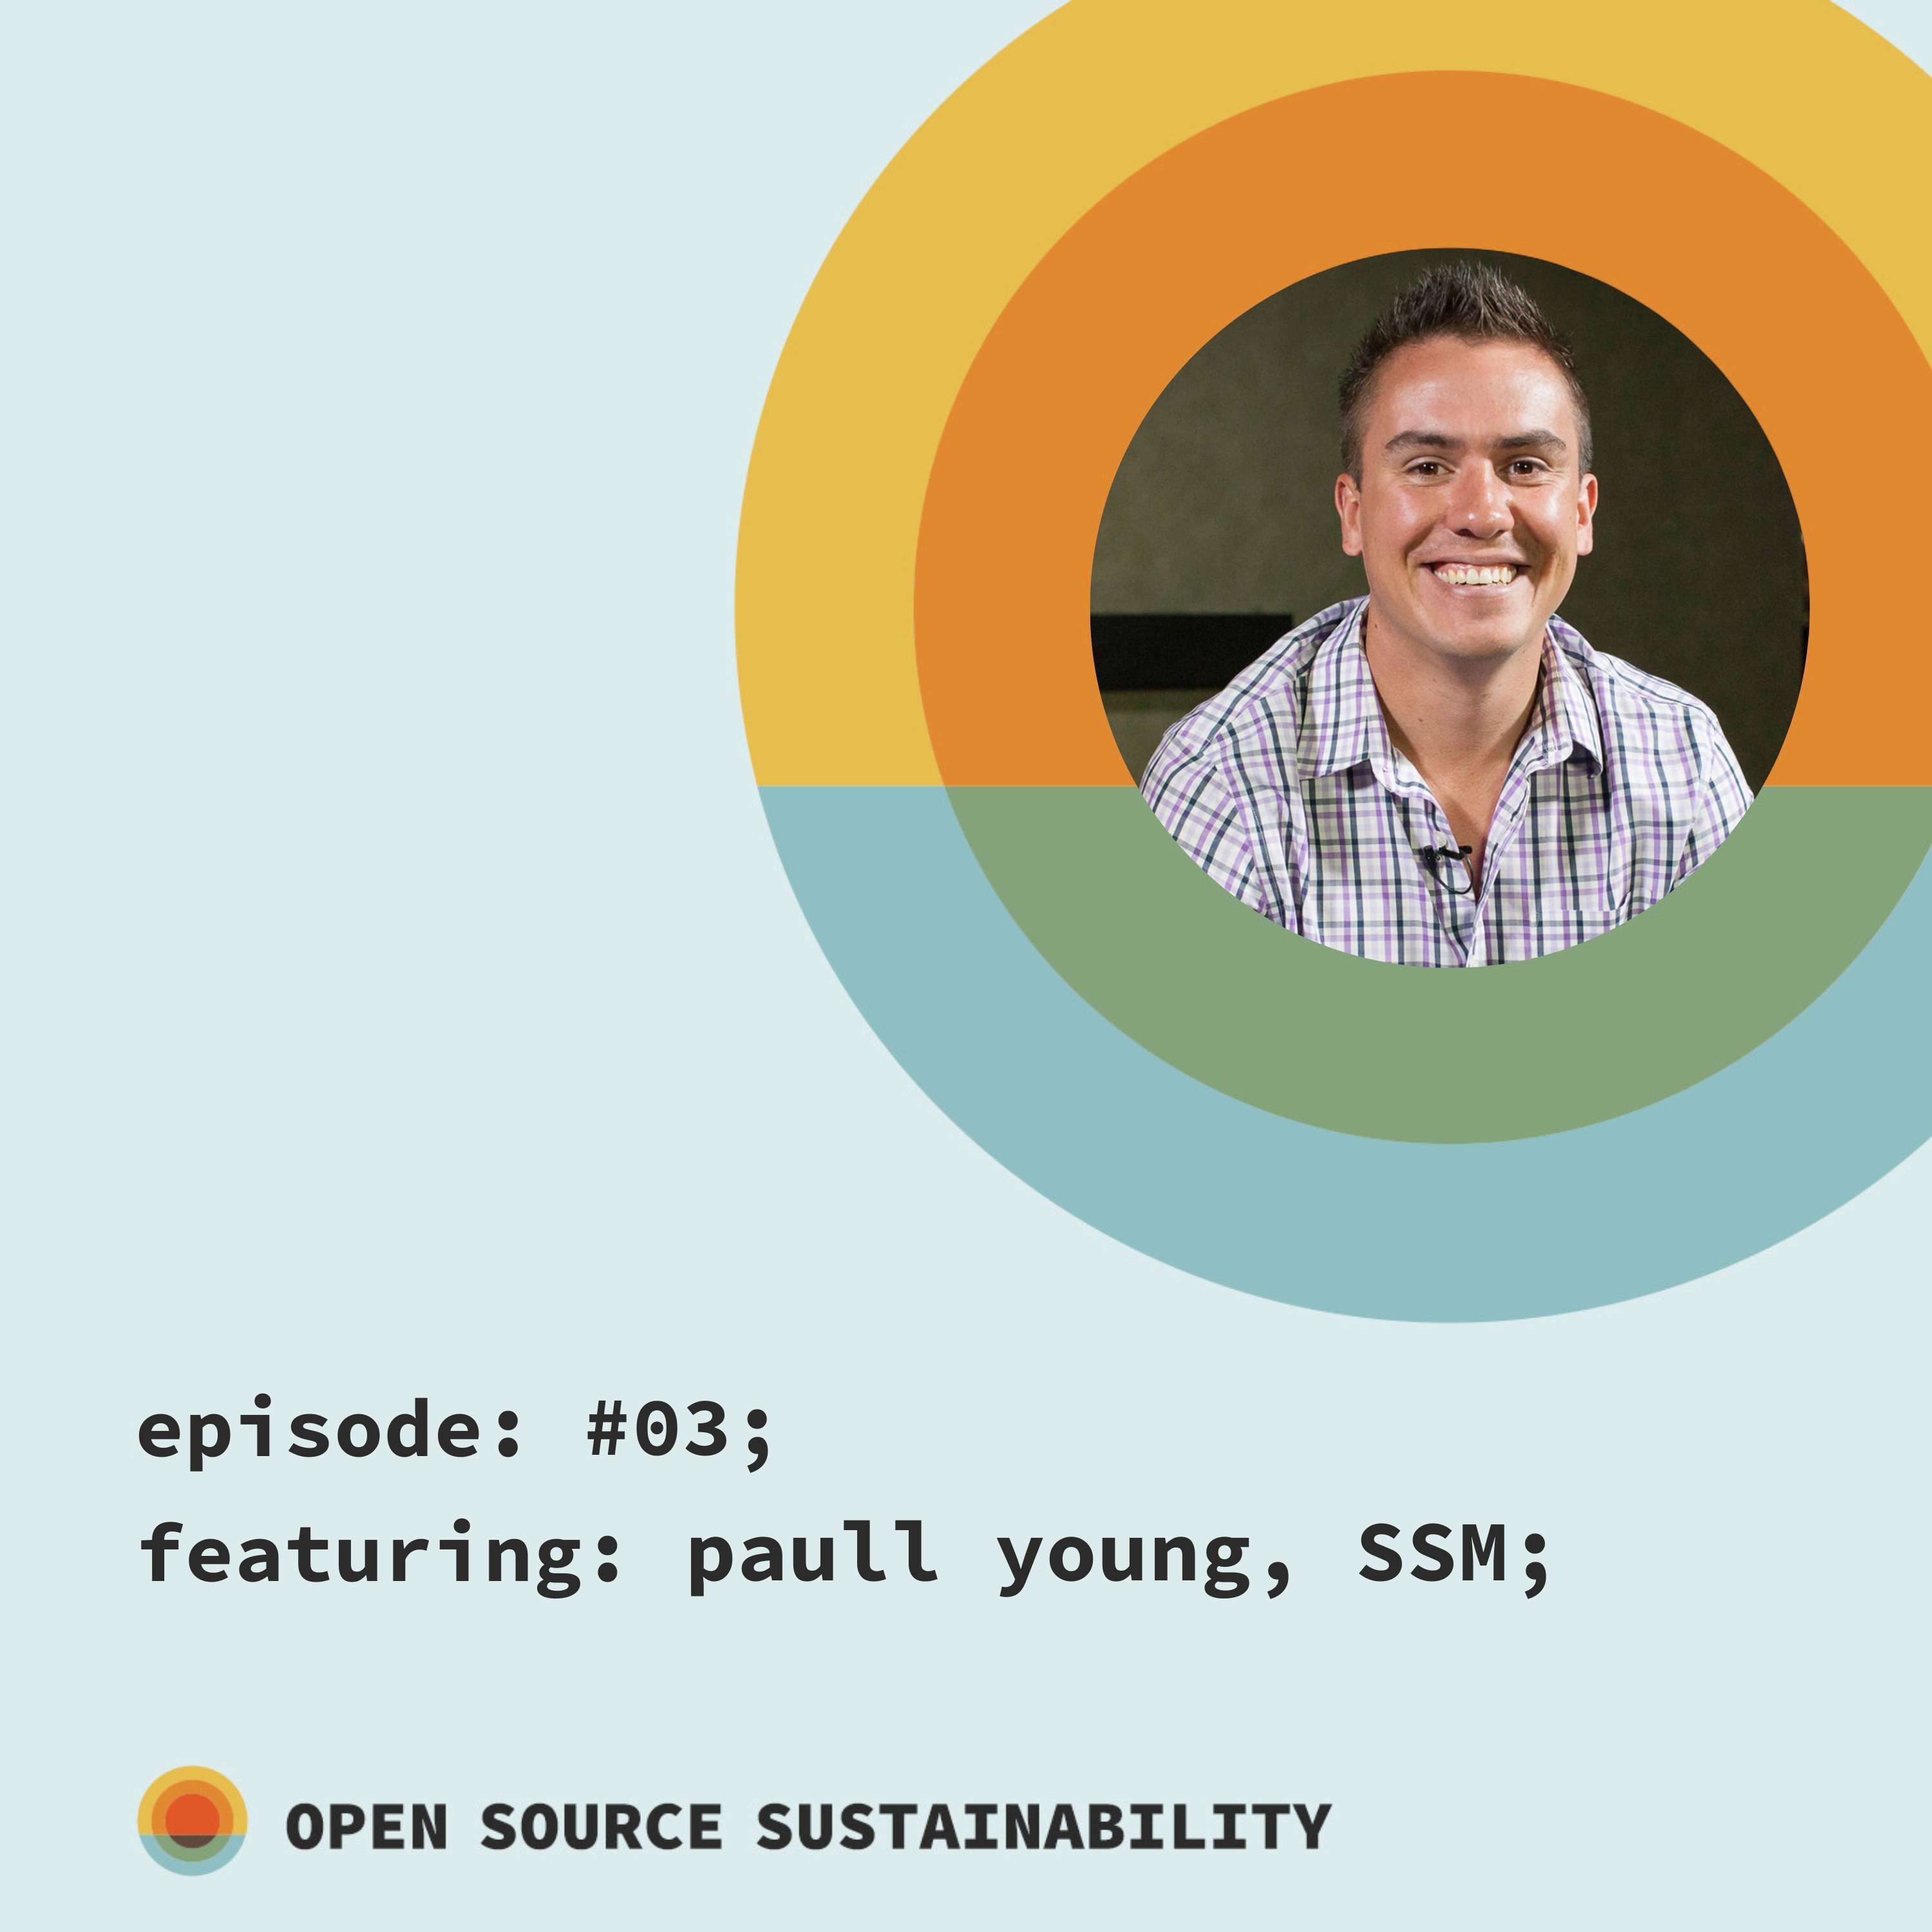 Meta: Sustainability Strategy Manager, Paull Young